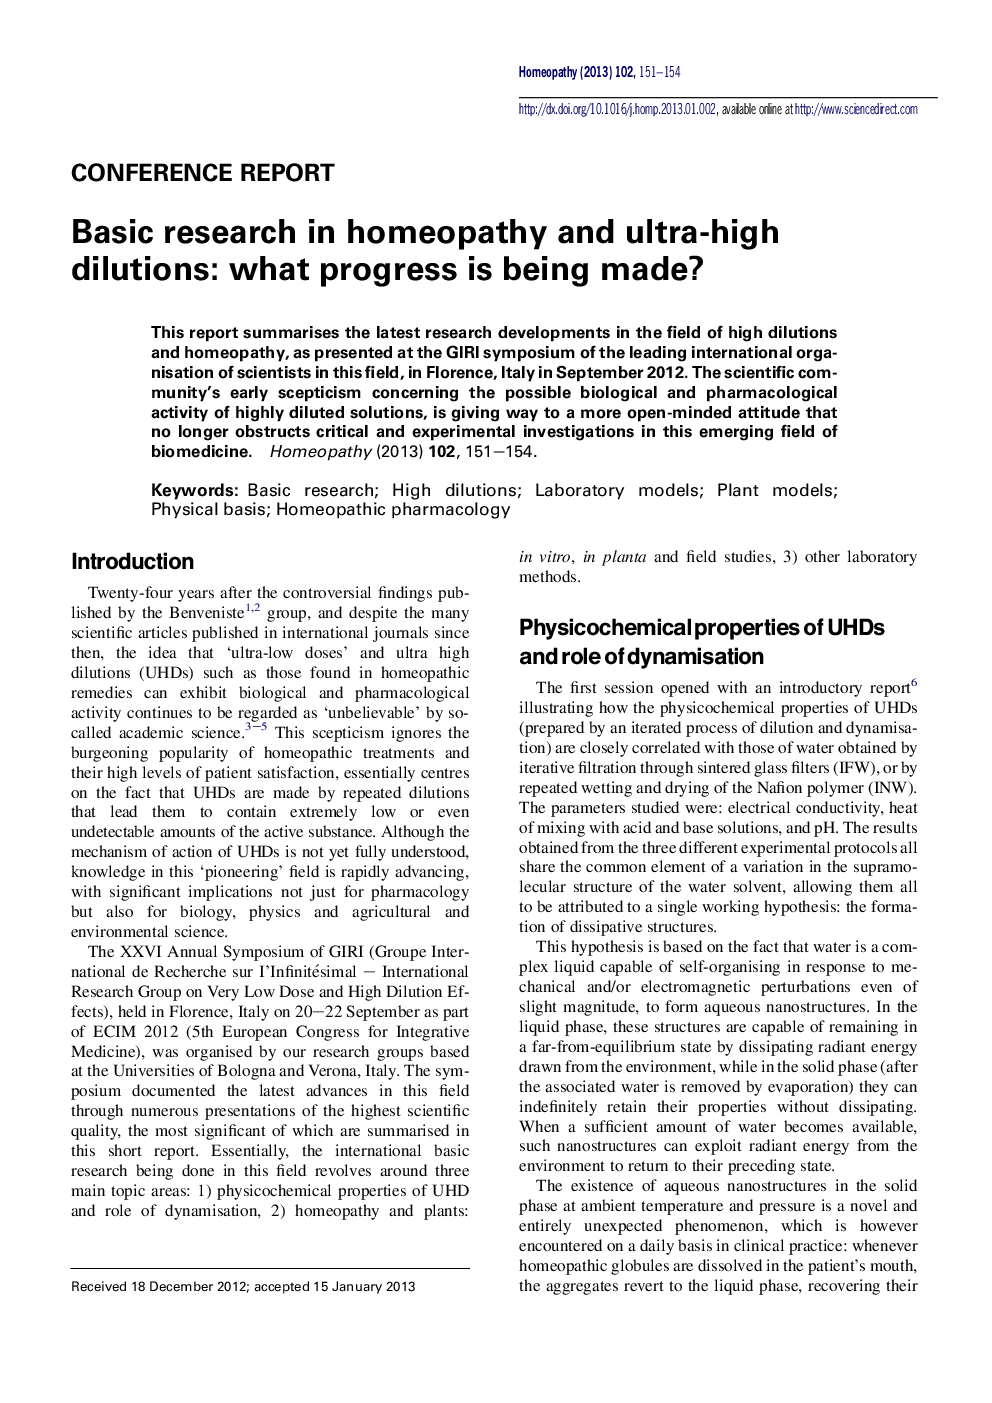 Basic research in homeopathy and ultra-high dilutions: what progress is being made?